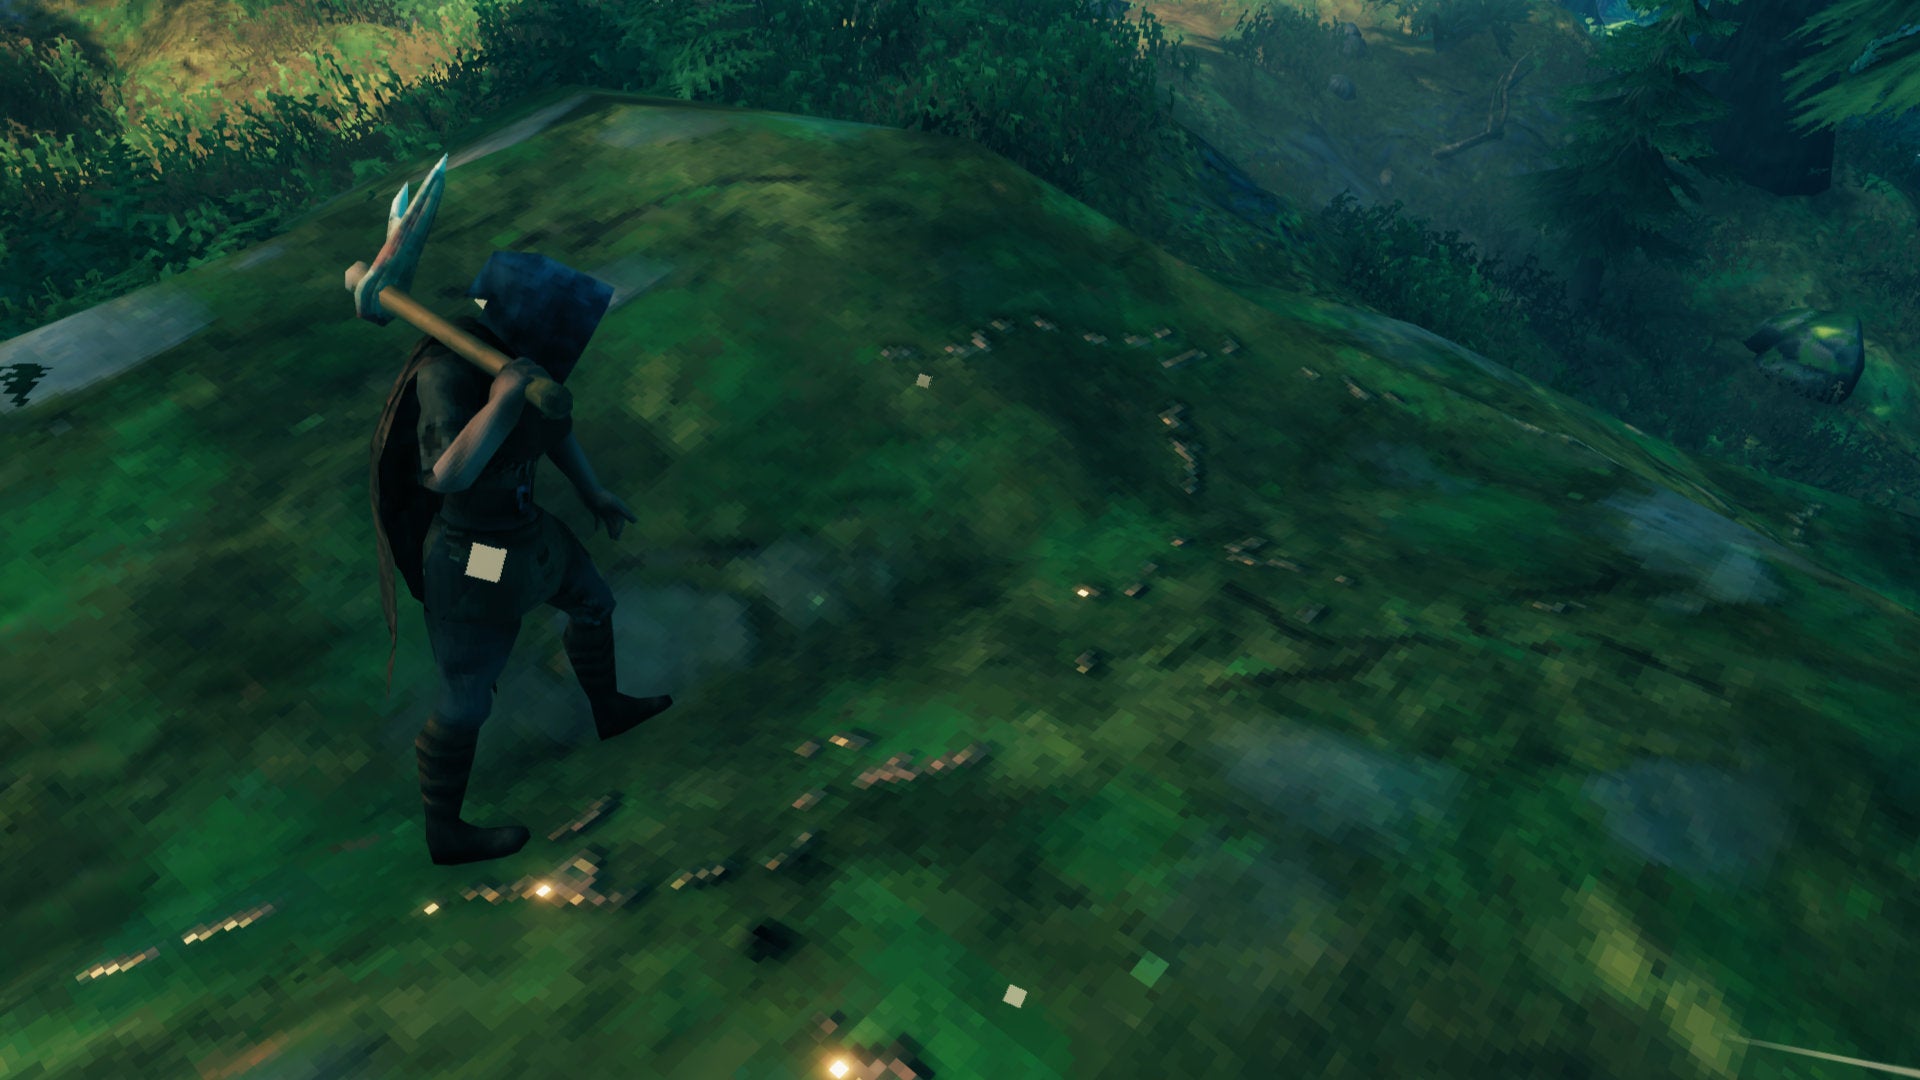 A Valheim screenshot of the player holding an Antler Pickaxe and standing atop a Copper Ore deposit in the Black Forest.